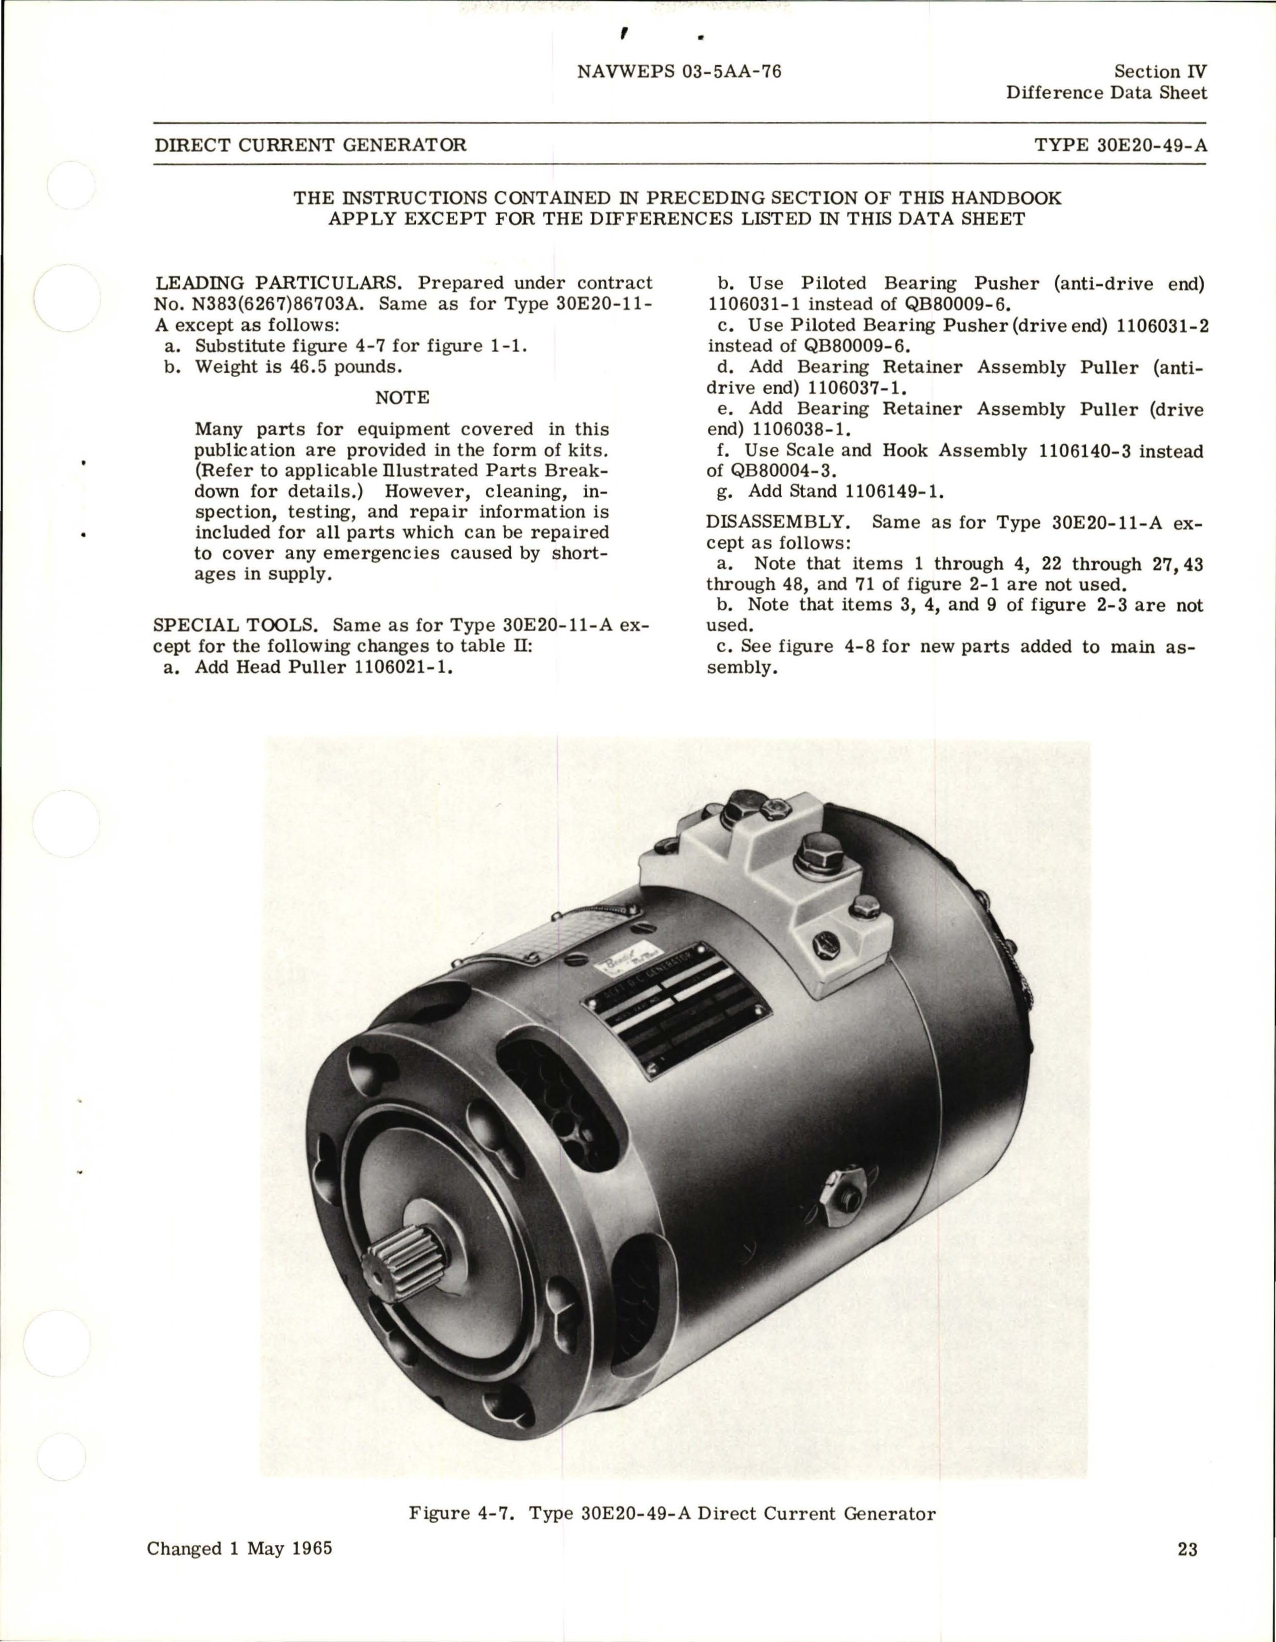 Sample page 5 from AirCorps Library document: Overhaul Instructions for Direct Current Generator - Type 30E20-5-B, 30E20-11-A, 30E20-11-B, and 30E20-49-A